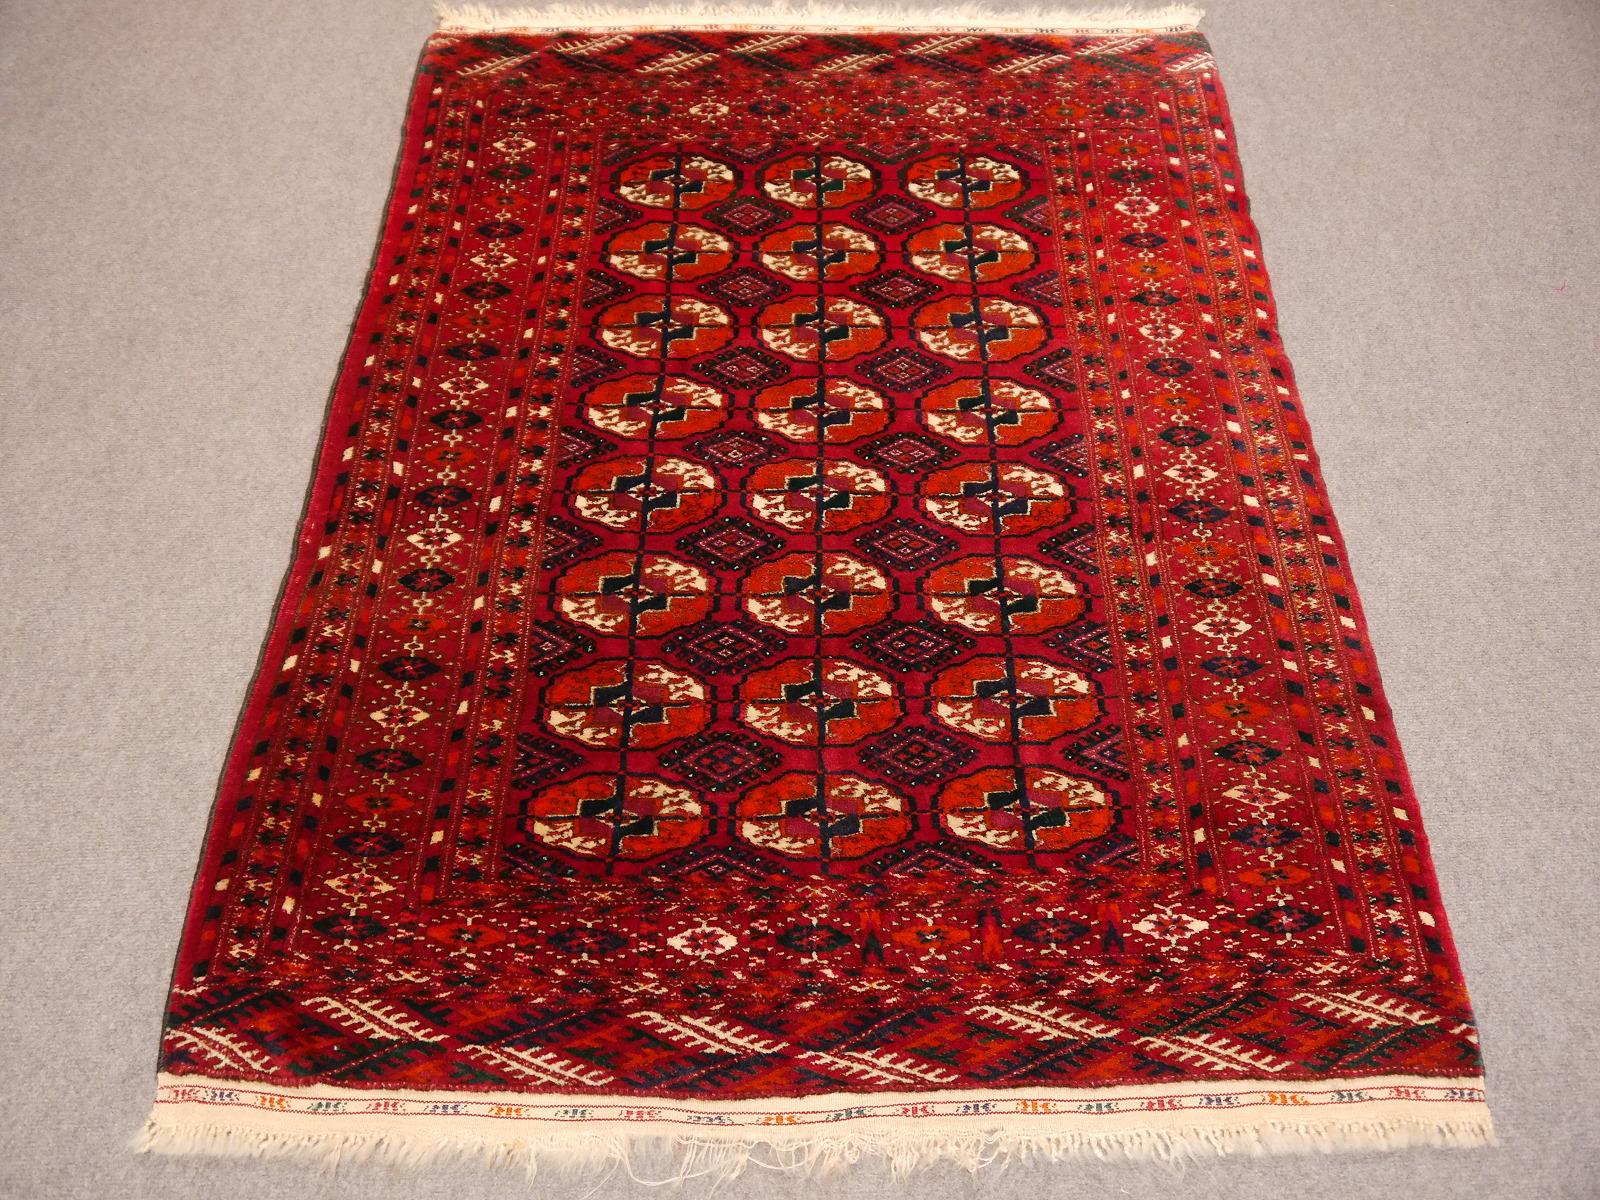 Fine hand-knotted Russian Turkman Bokhara rug or Turkmen rug

Beautiful antique tribal Turkmen carpet in great condition. These carpets are named 